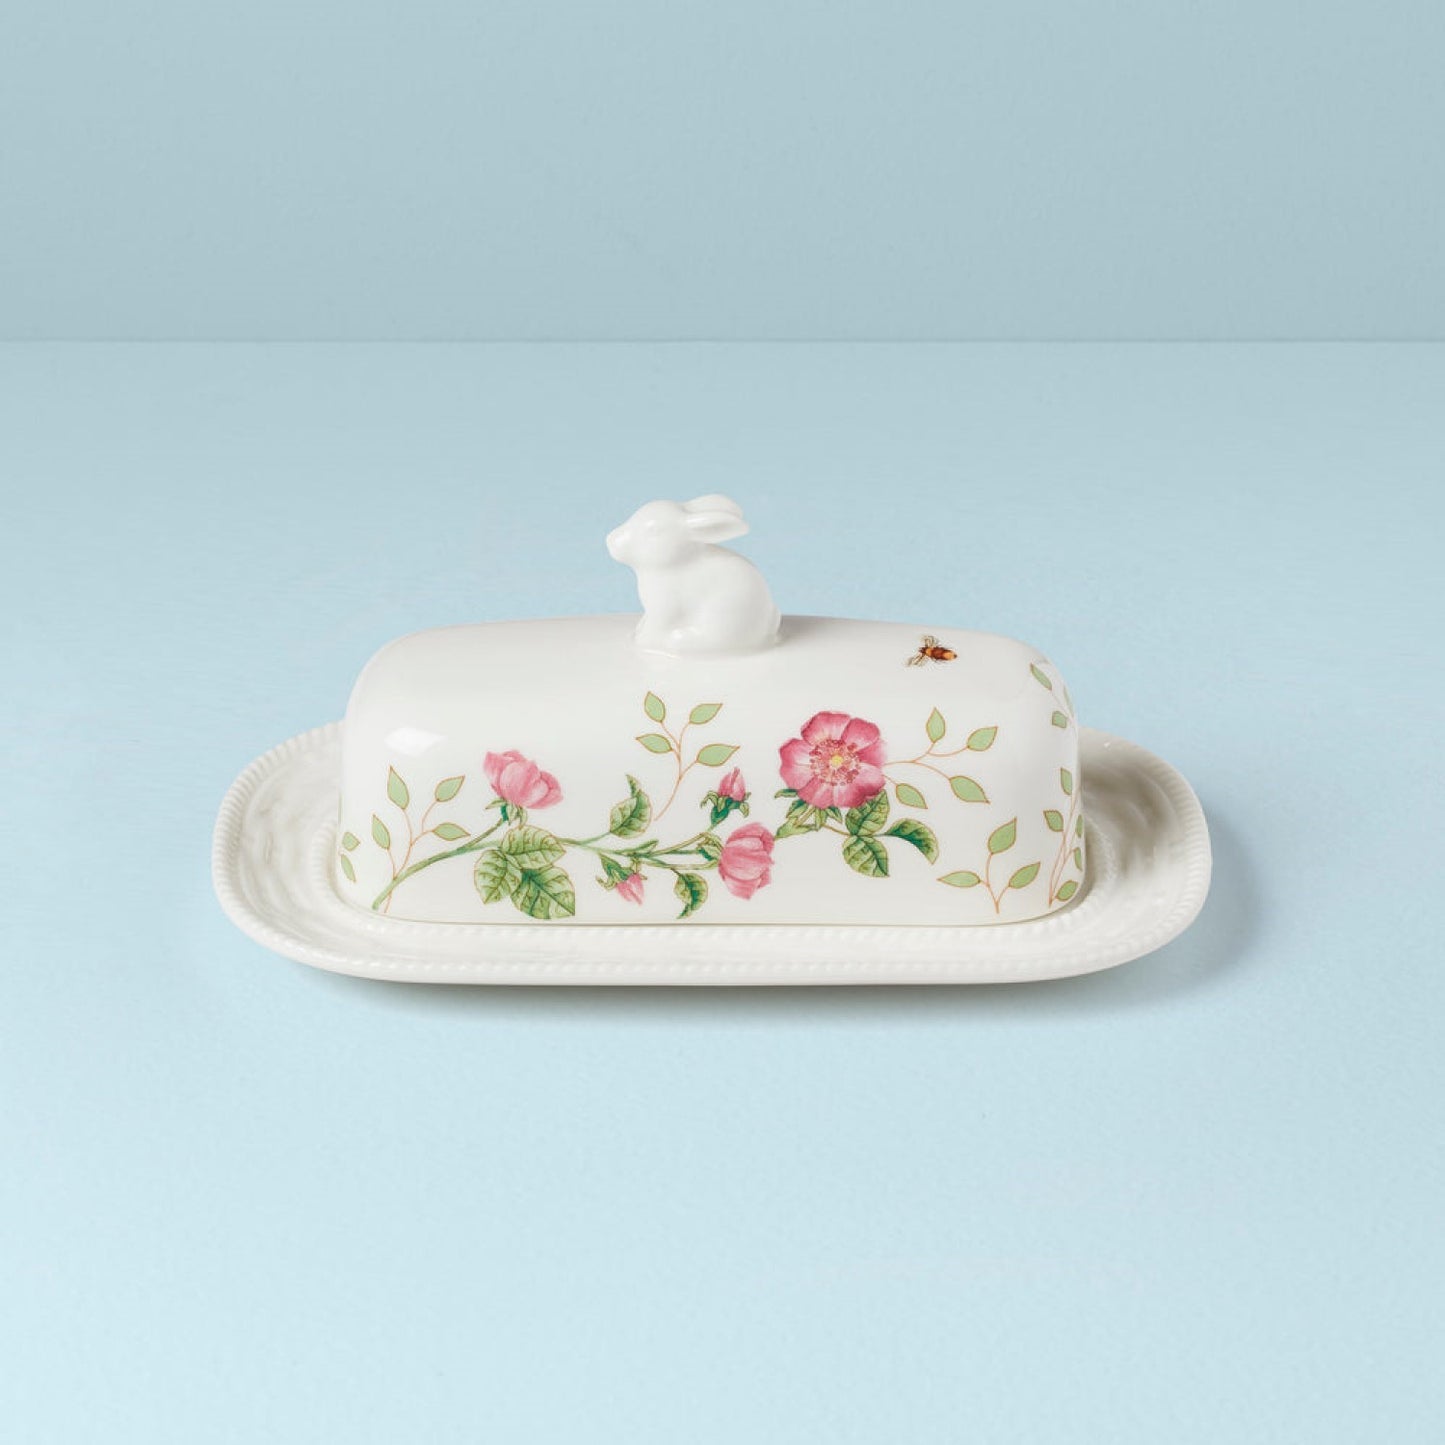 Lenox Butterfly Meadow Bunny Covered Butter Dish.